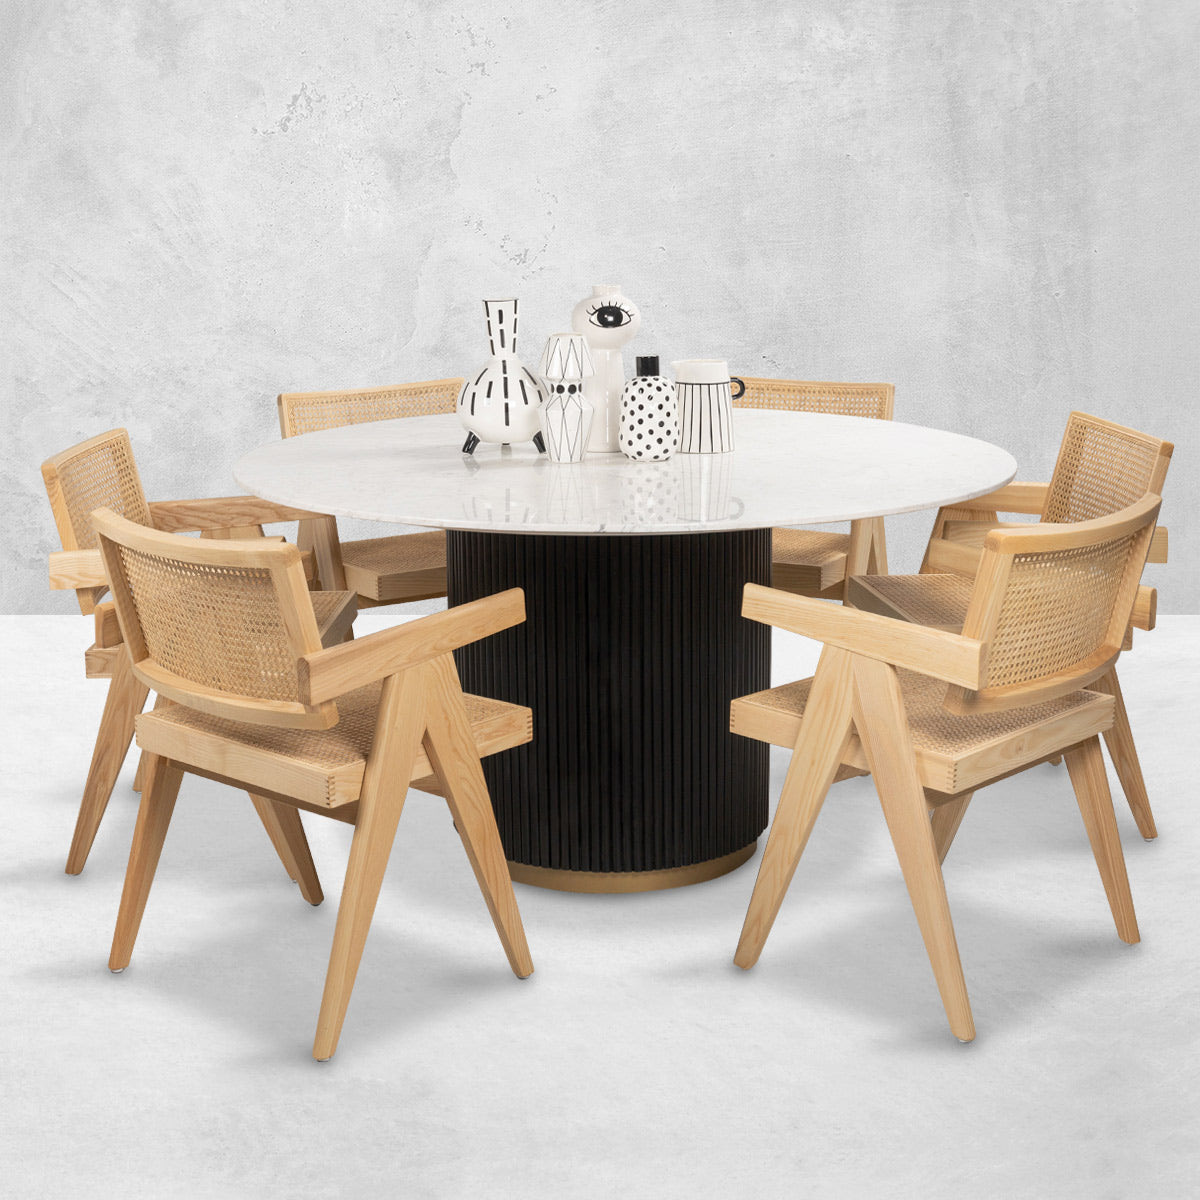 Ubud Round Dining Table Marble Top and Black Matte Base